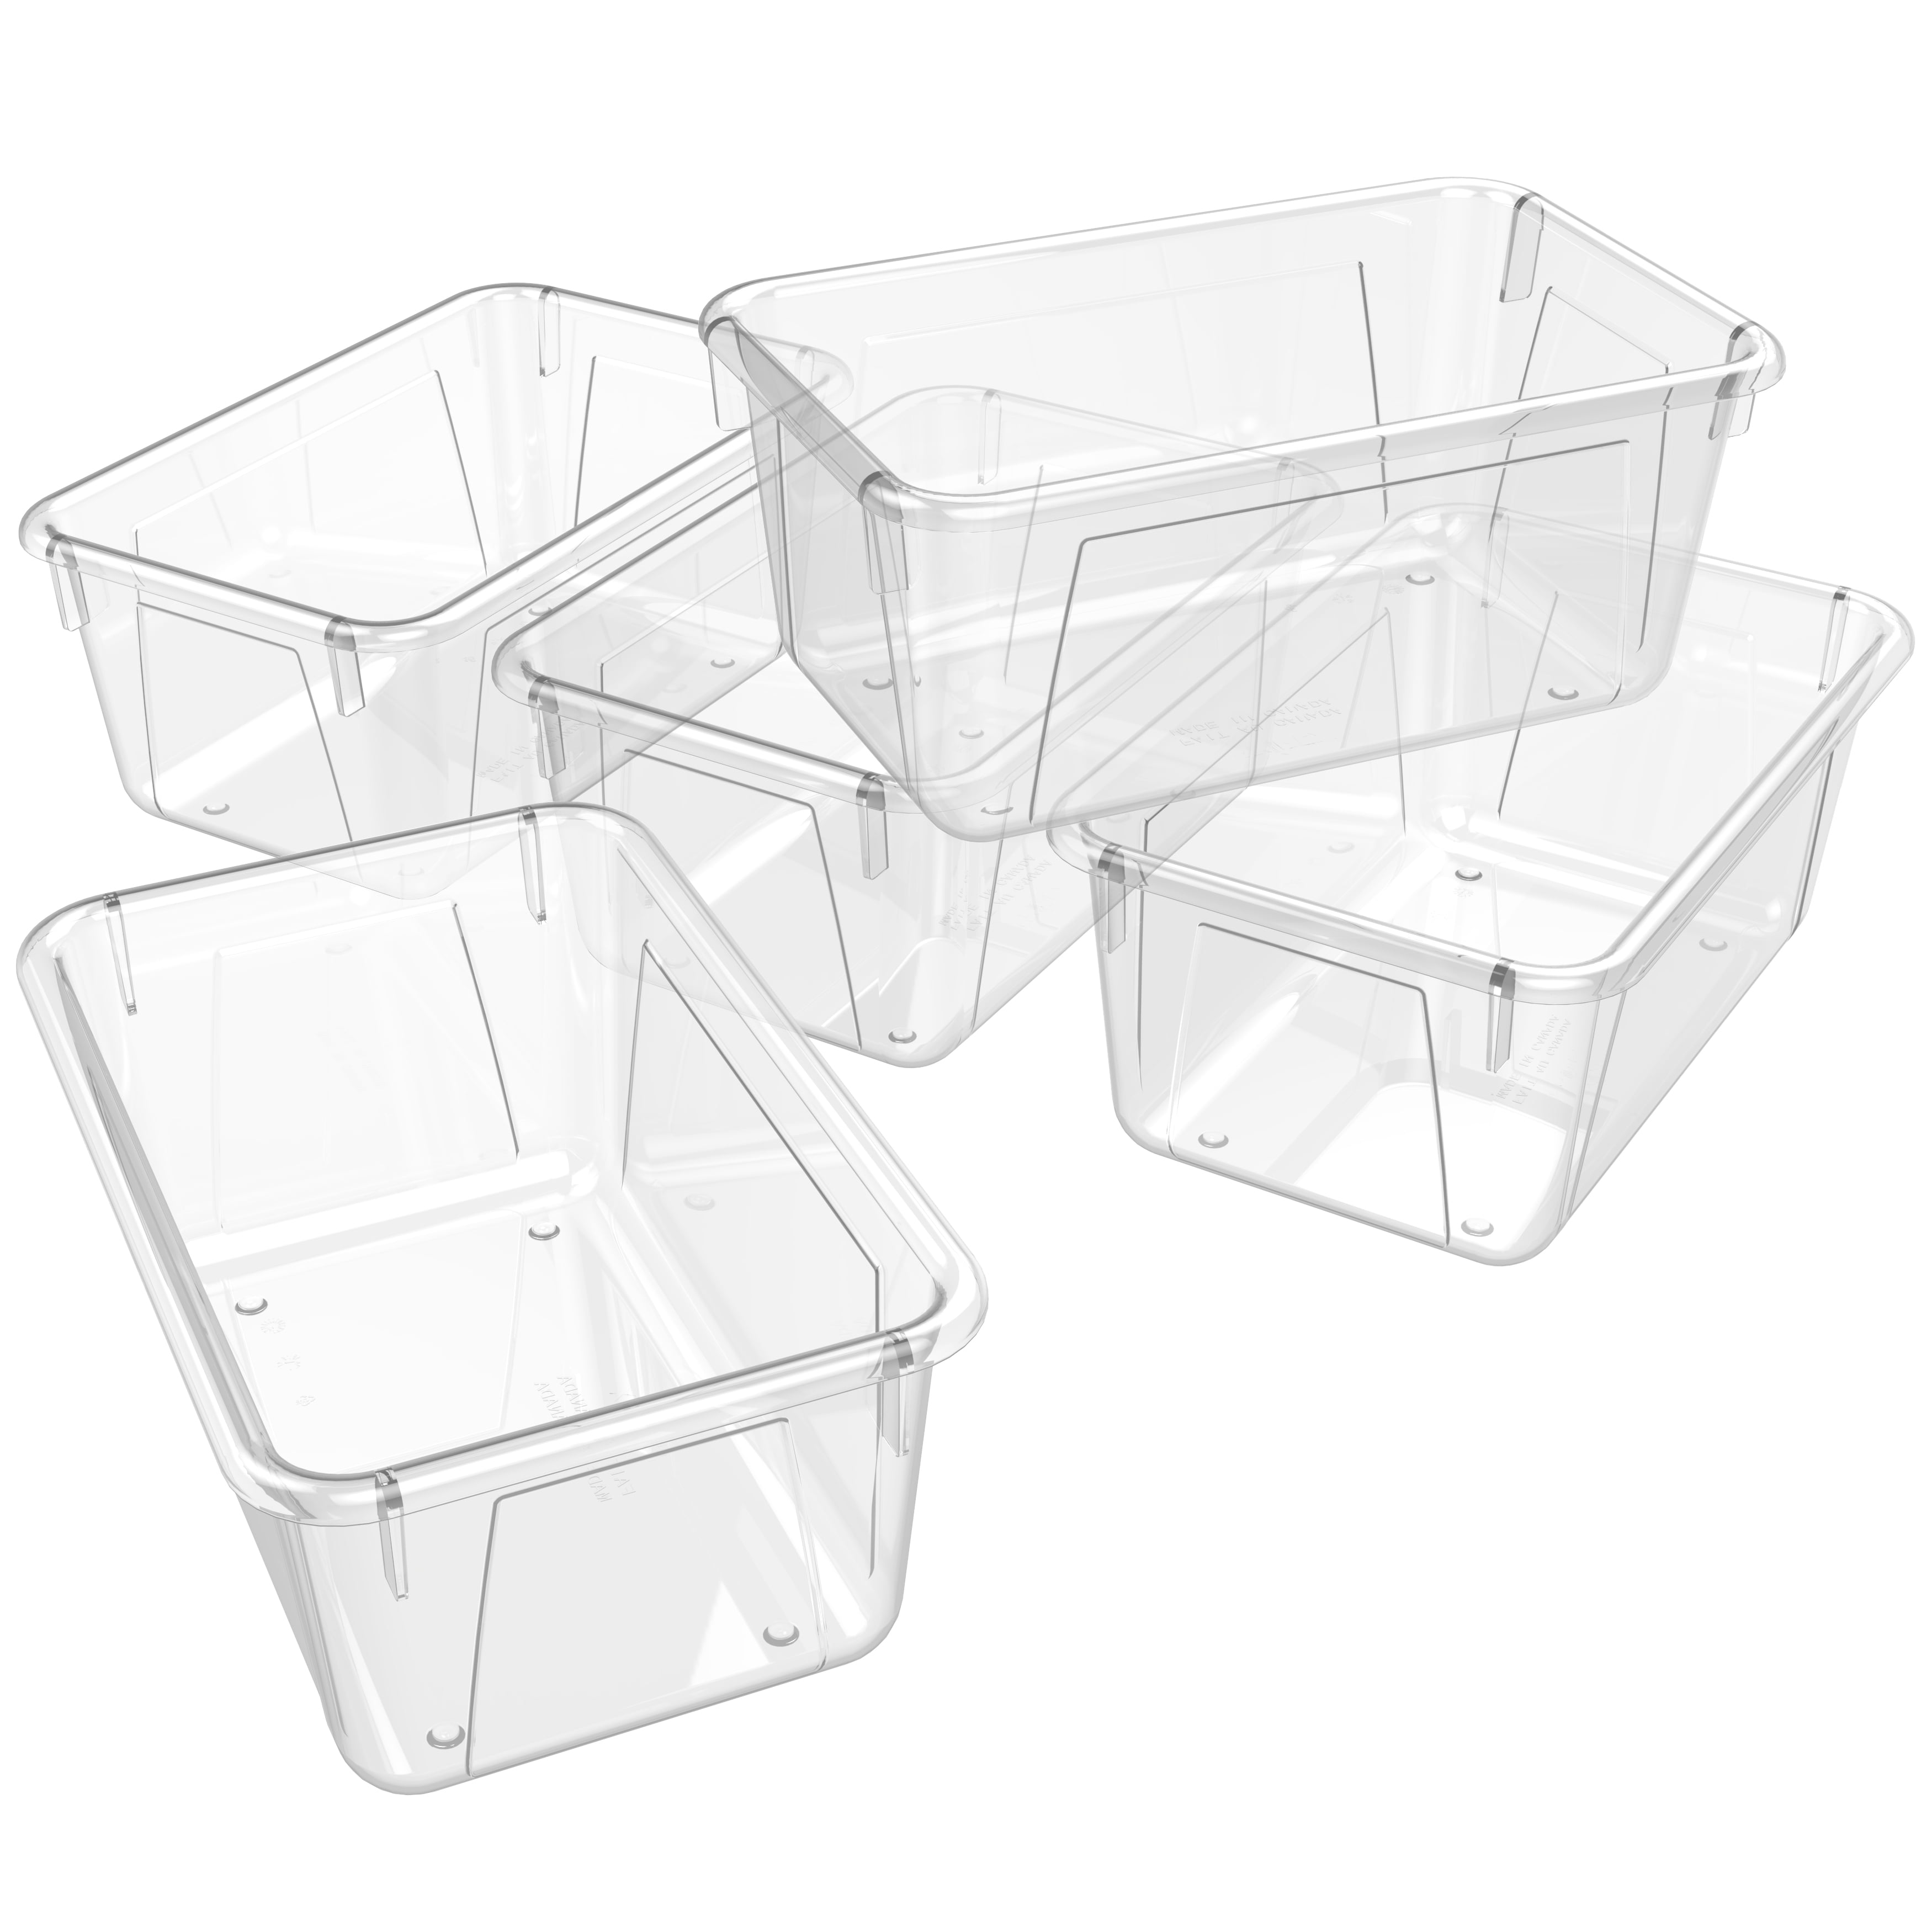 GAMENOTE Plastic Storage Bins with Lids - 5 Qt, 6 Pack Clear Small  Stackable Cubby Storage Organizer Containers for Organizing (12 × 7.2 × 5.1  inches)